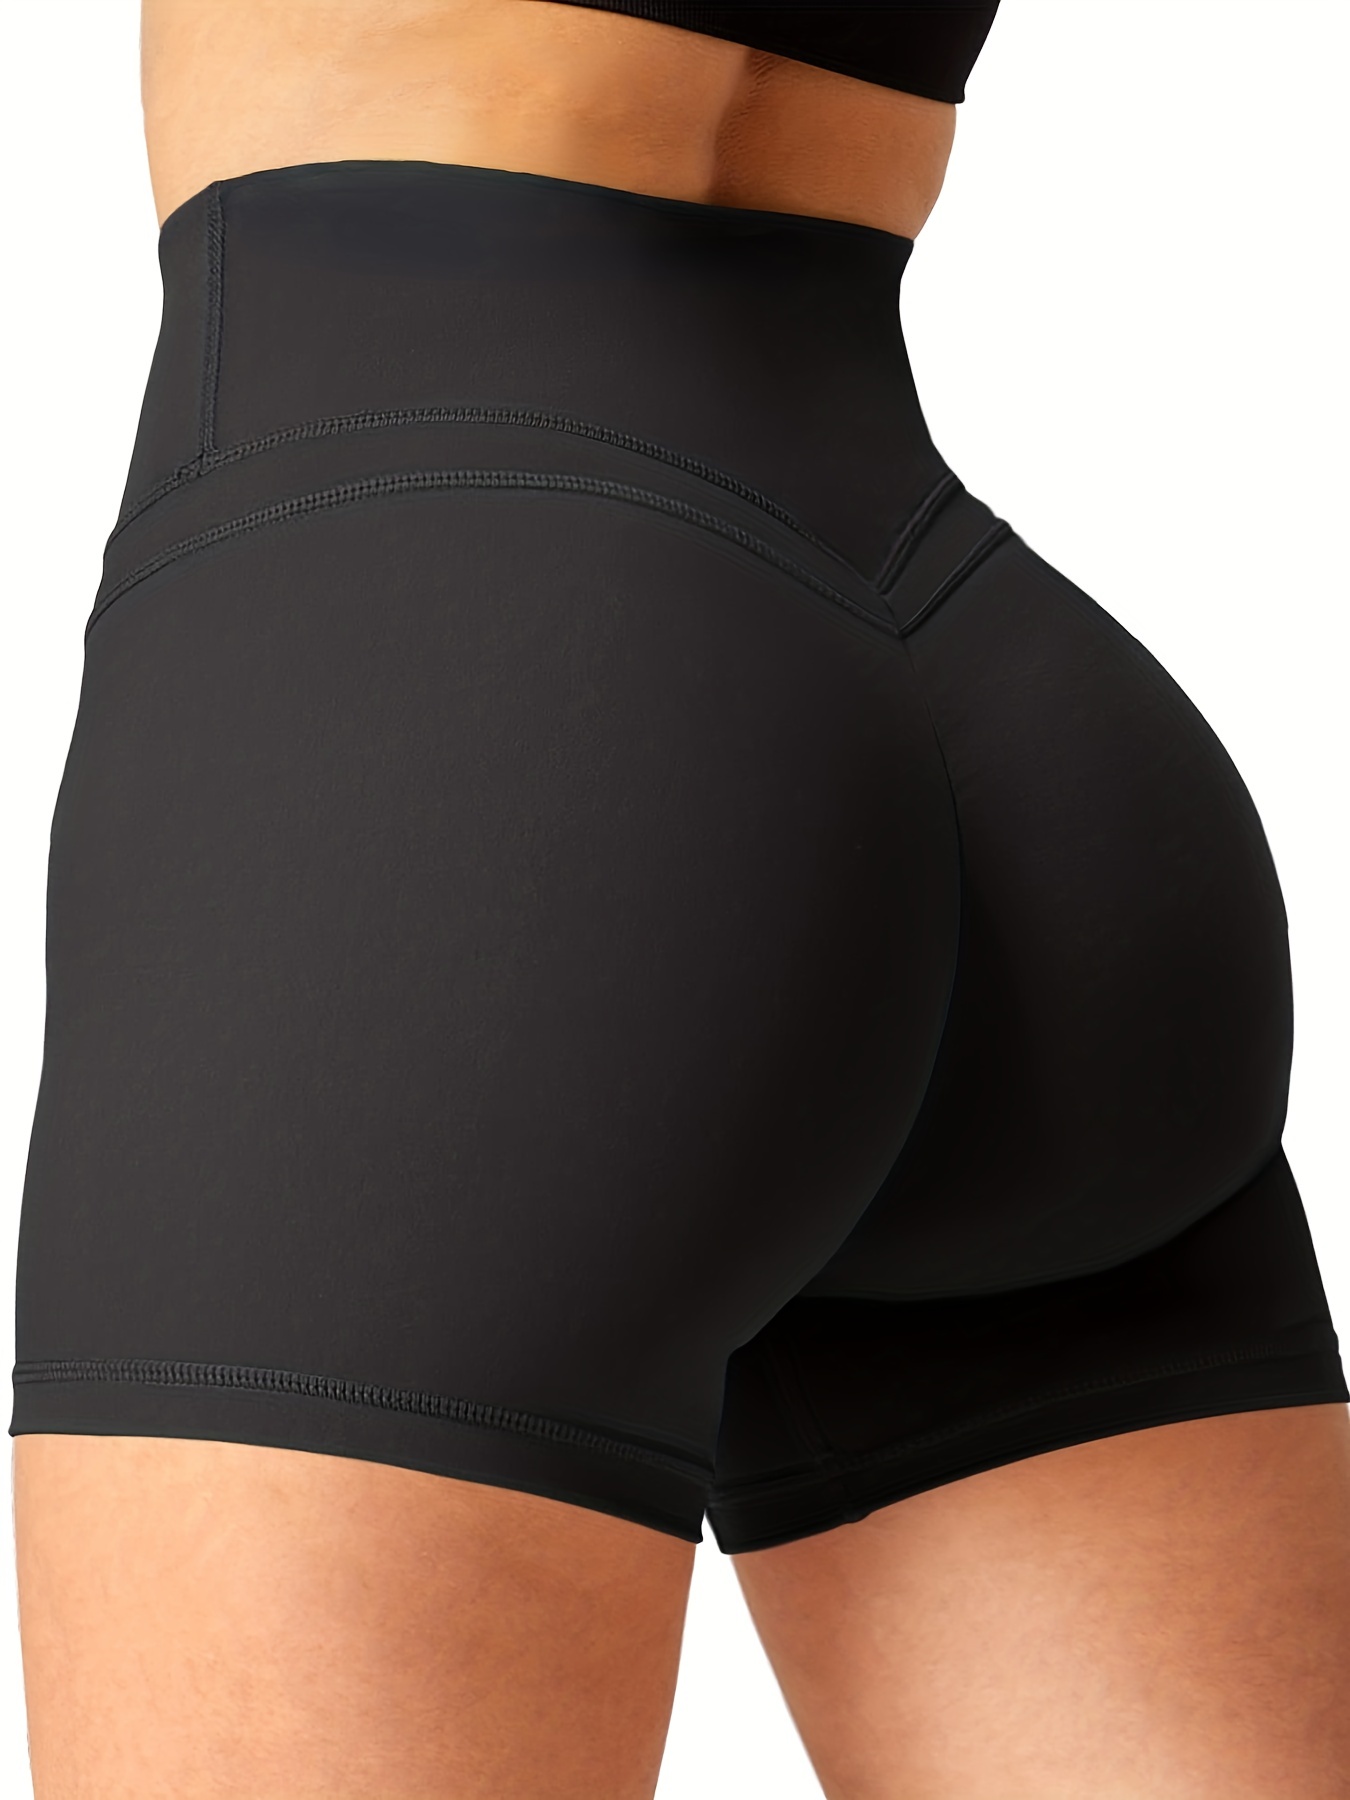 Booty Shorts for Women High Waisted Yoga Shorts Sexy Butt Lifting Short  Workout Hot Pants